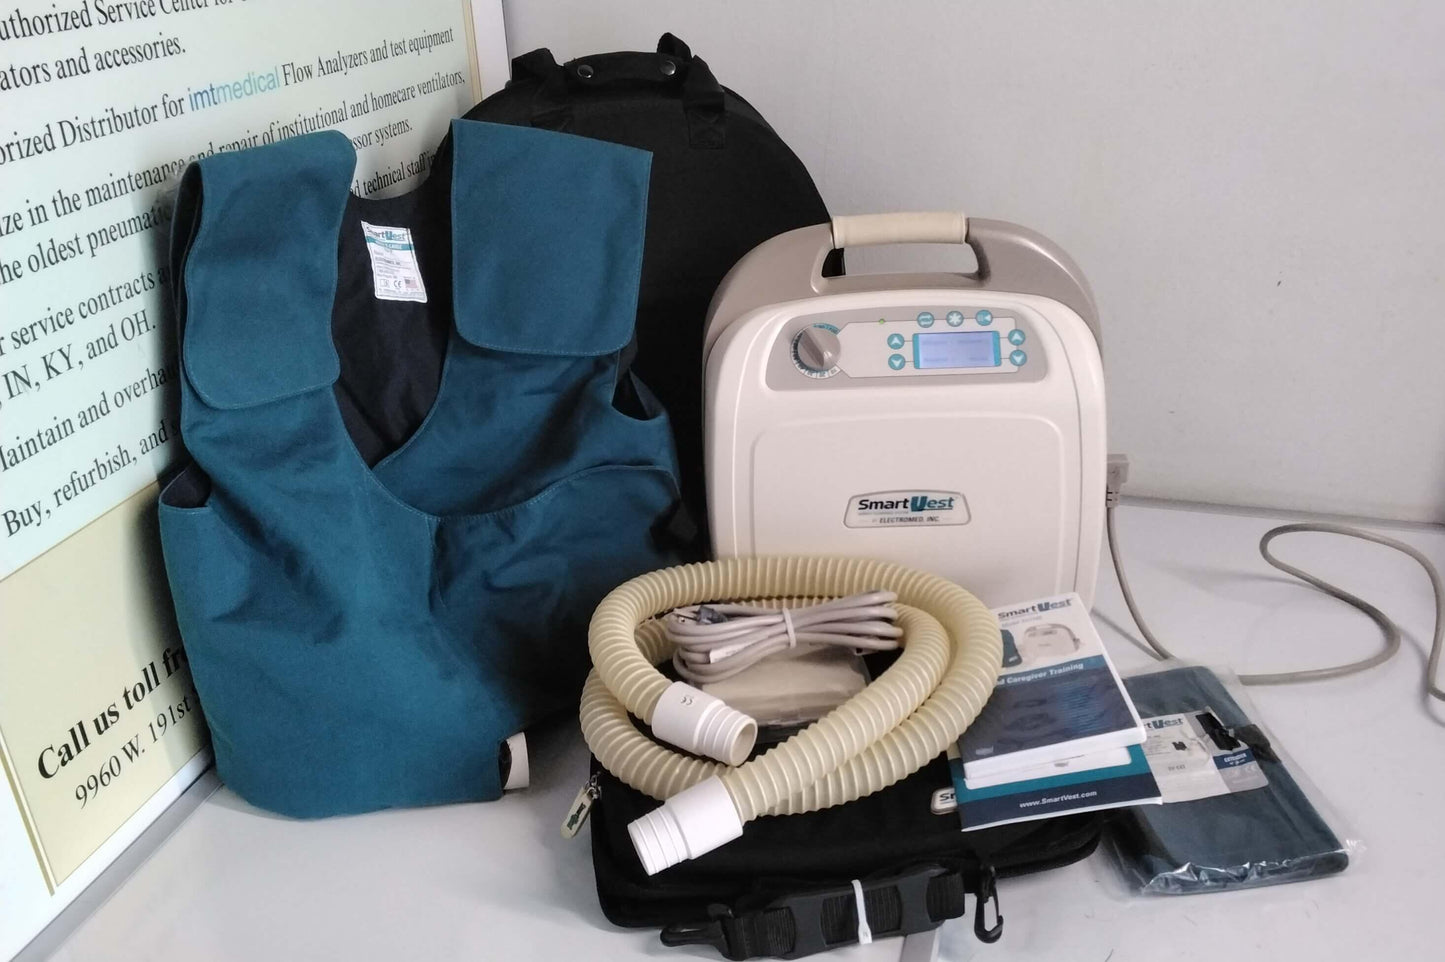 REFURBISHED Electromed SmartVest HFCWO Airway Clearance Device SV2100 with Warranty & Free Shipping - MBR Medicals